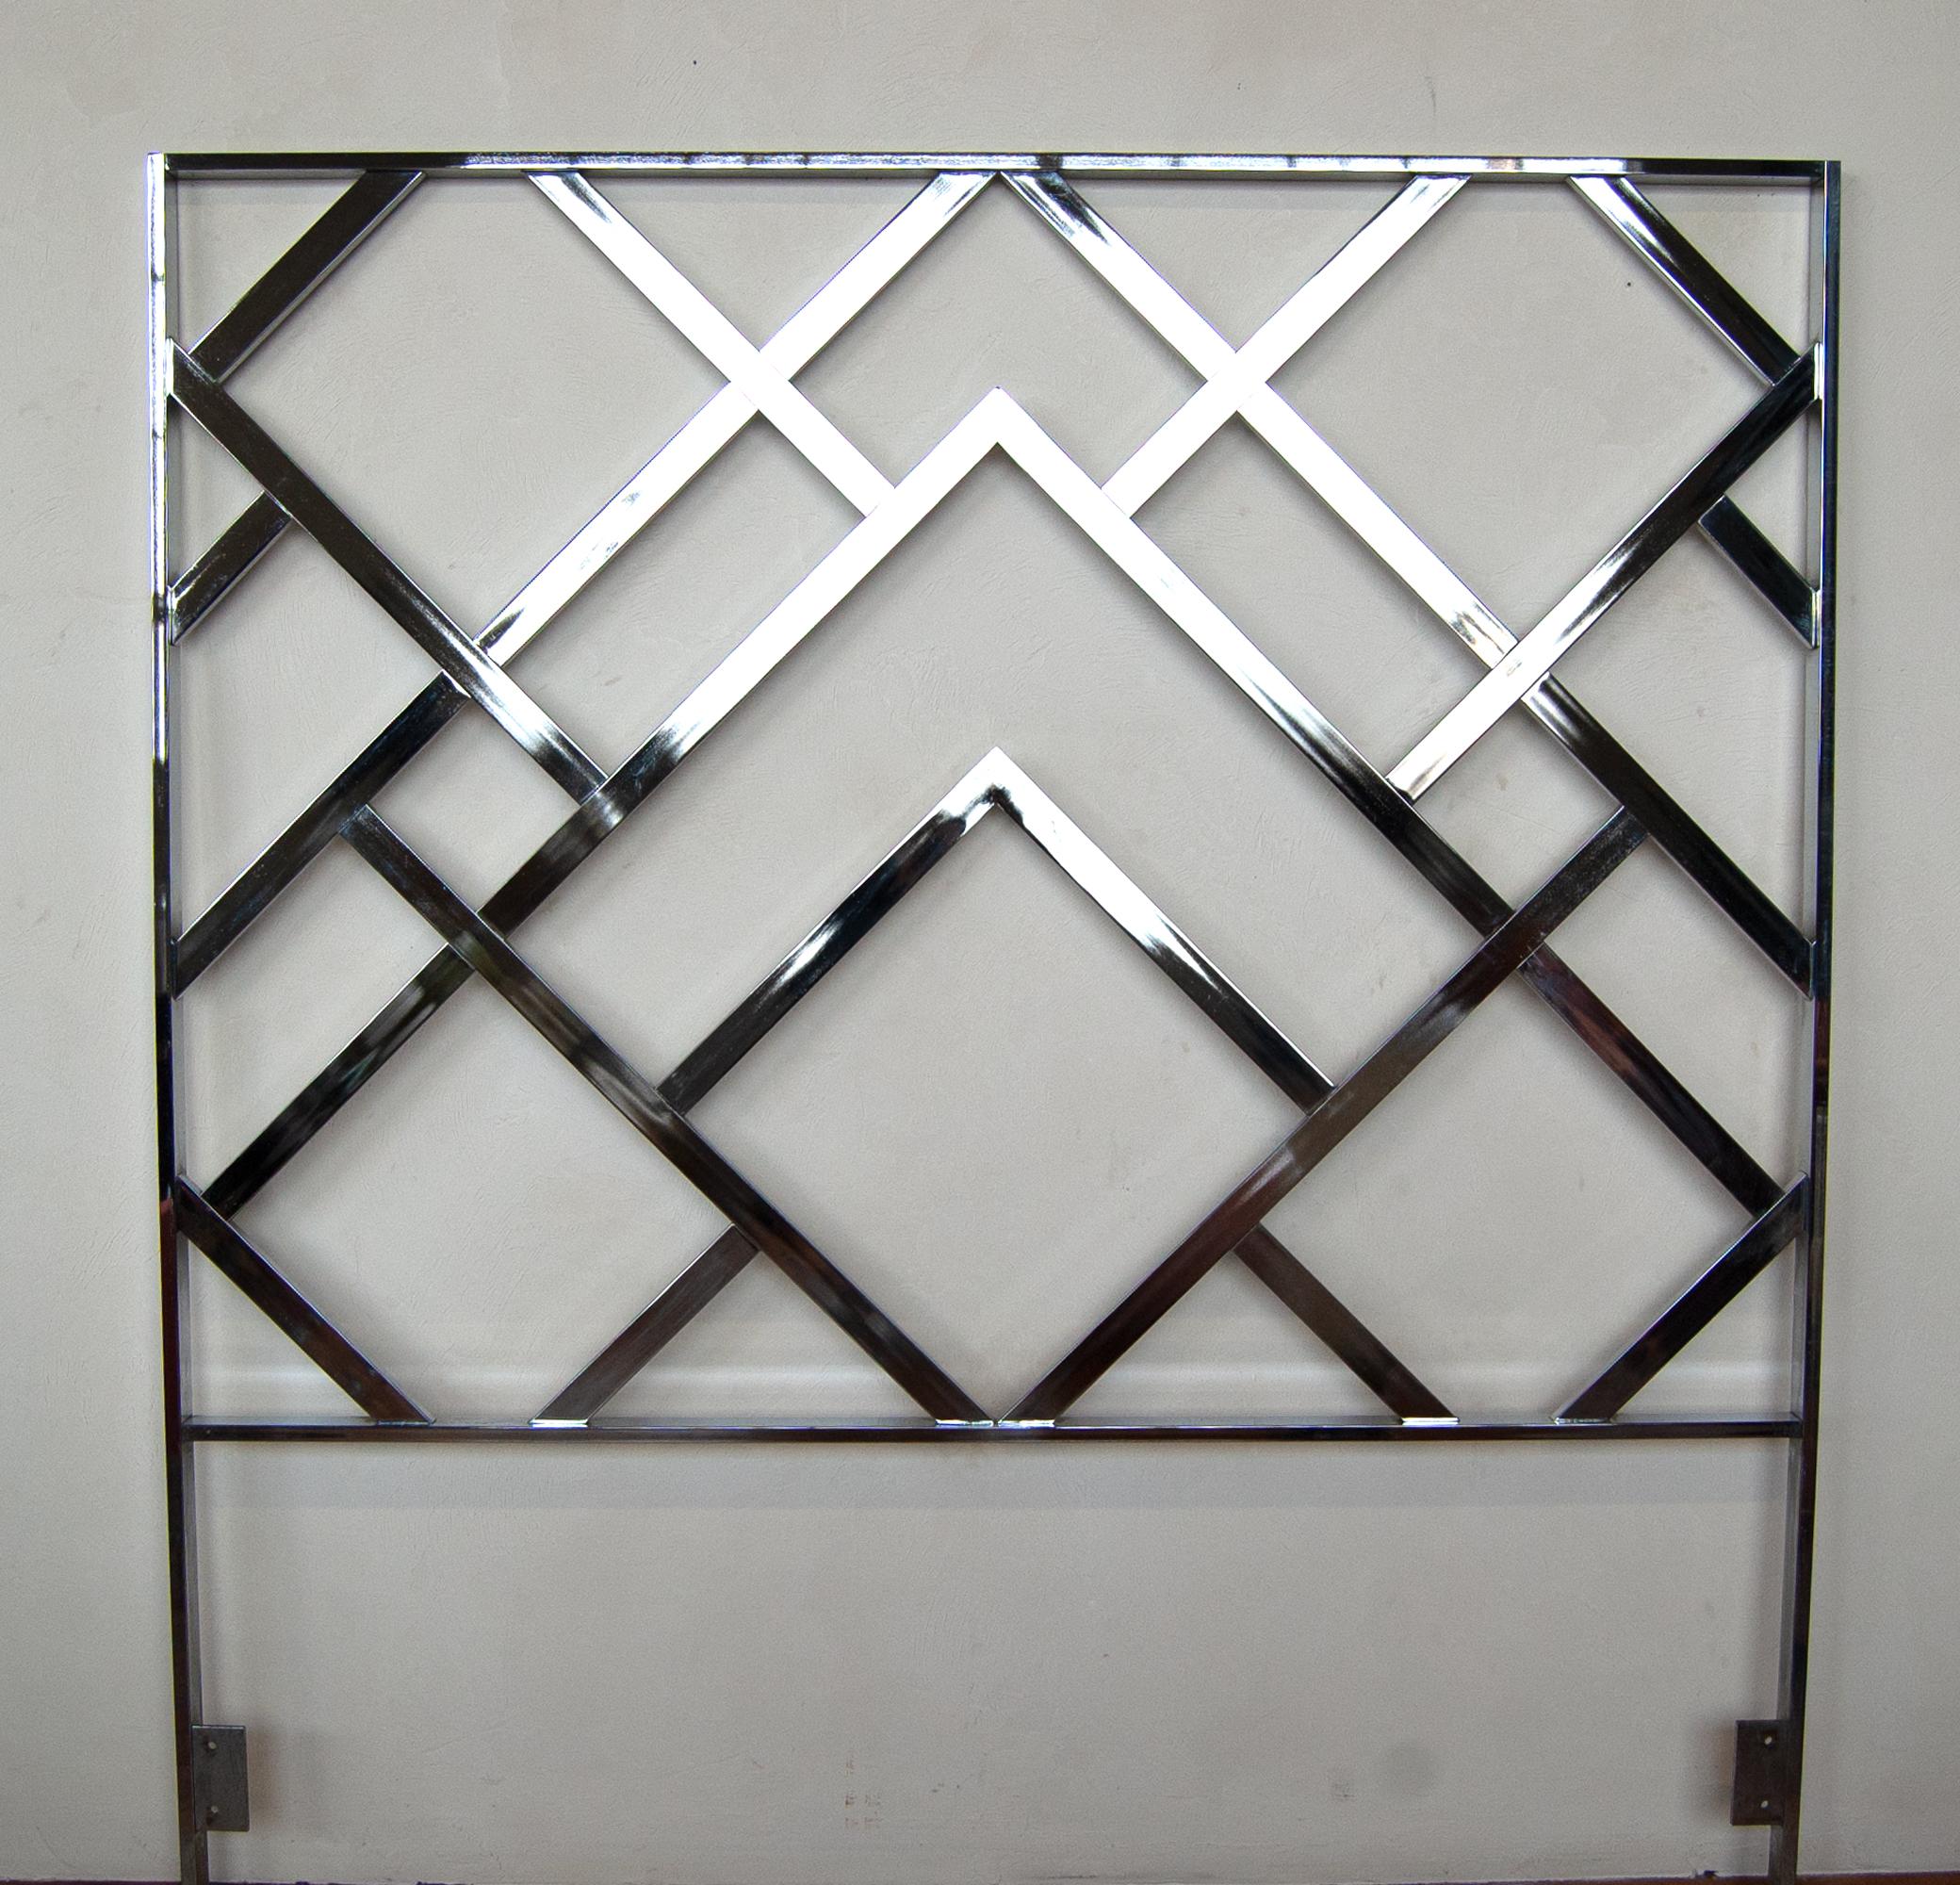 Beautiful Hollywood Regency style, chrome headboard in a timeless geometric fretwork pattern, designed by Milo Baughman for Design Institute American. 

Founded in 1972, DIA was a design-driven producer of furniture for wall units, occasional,